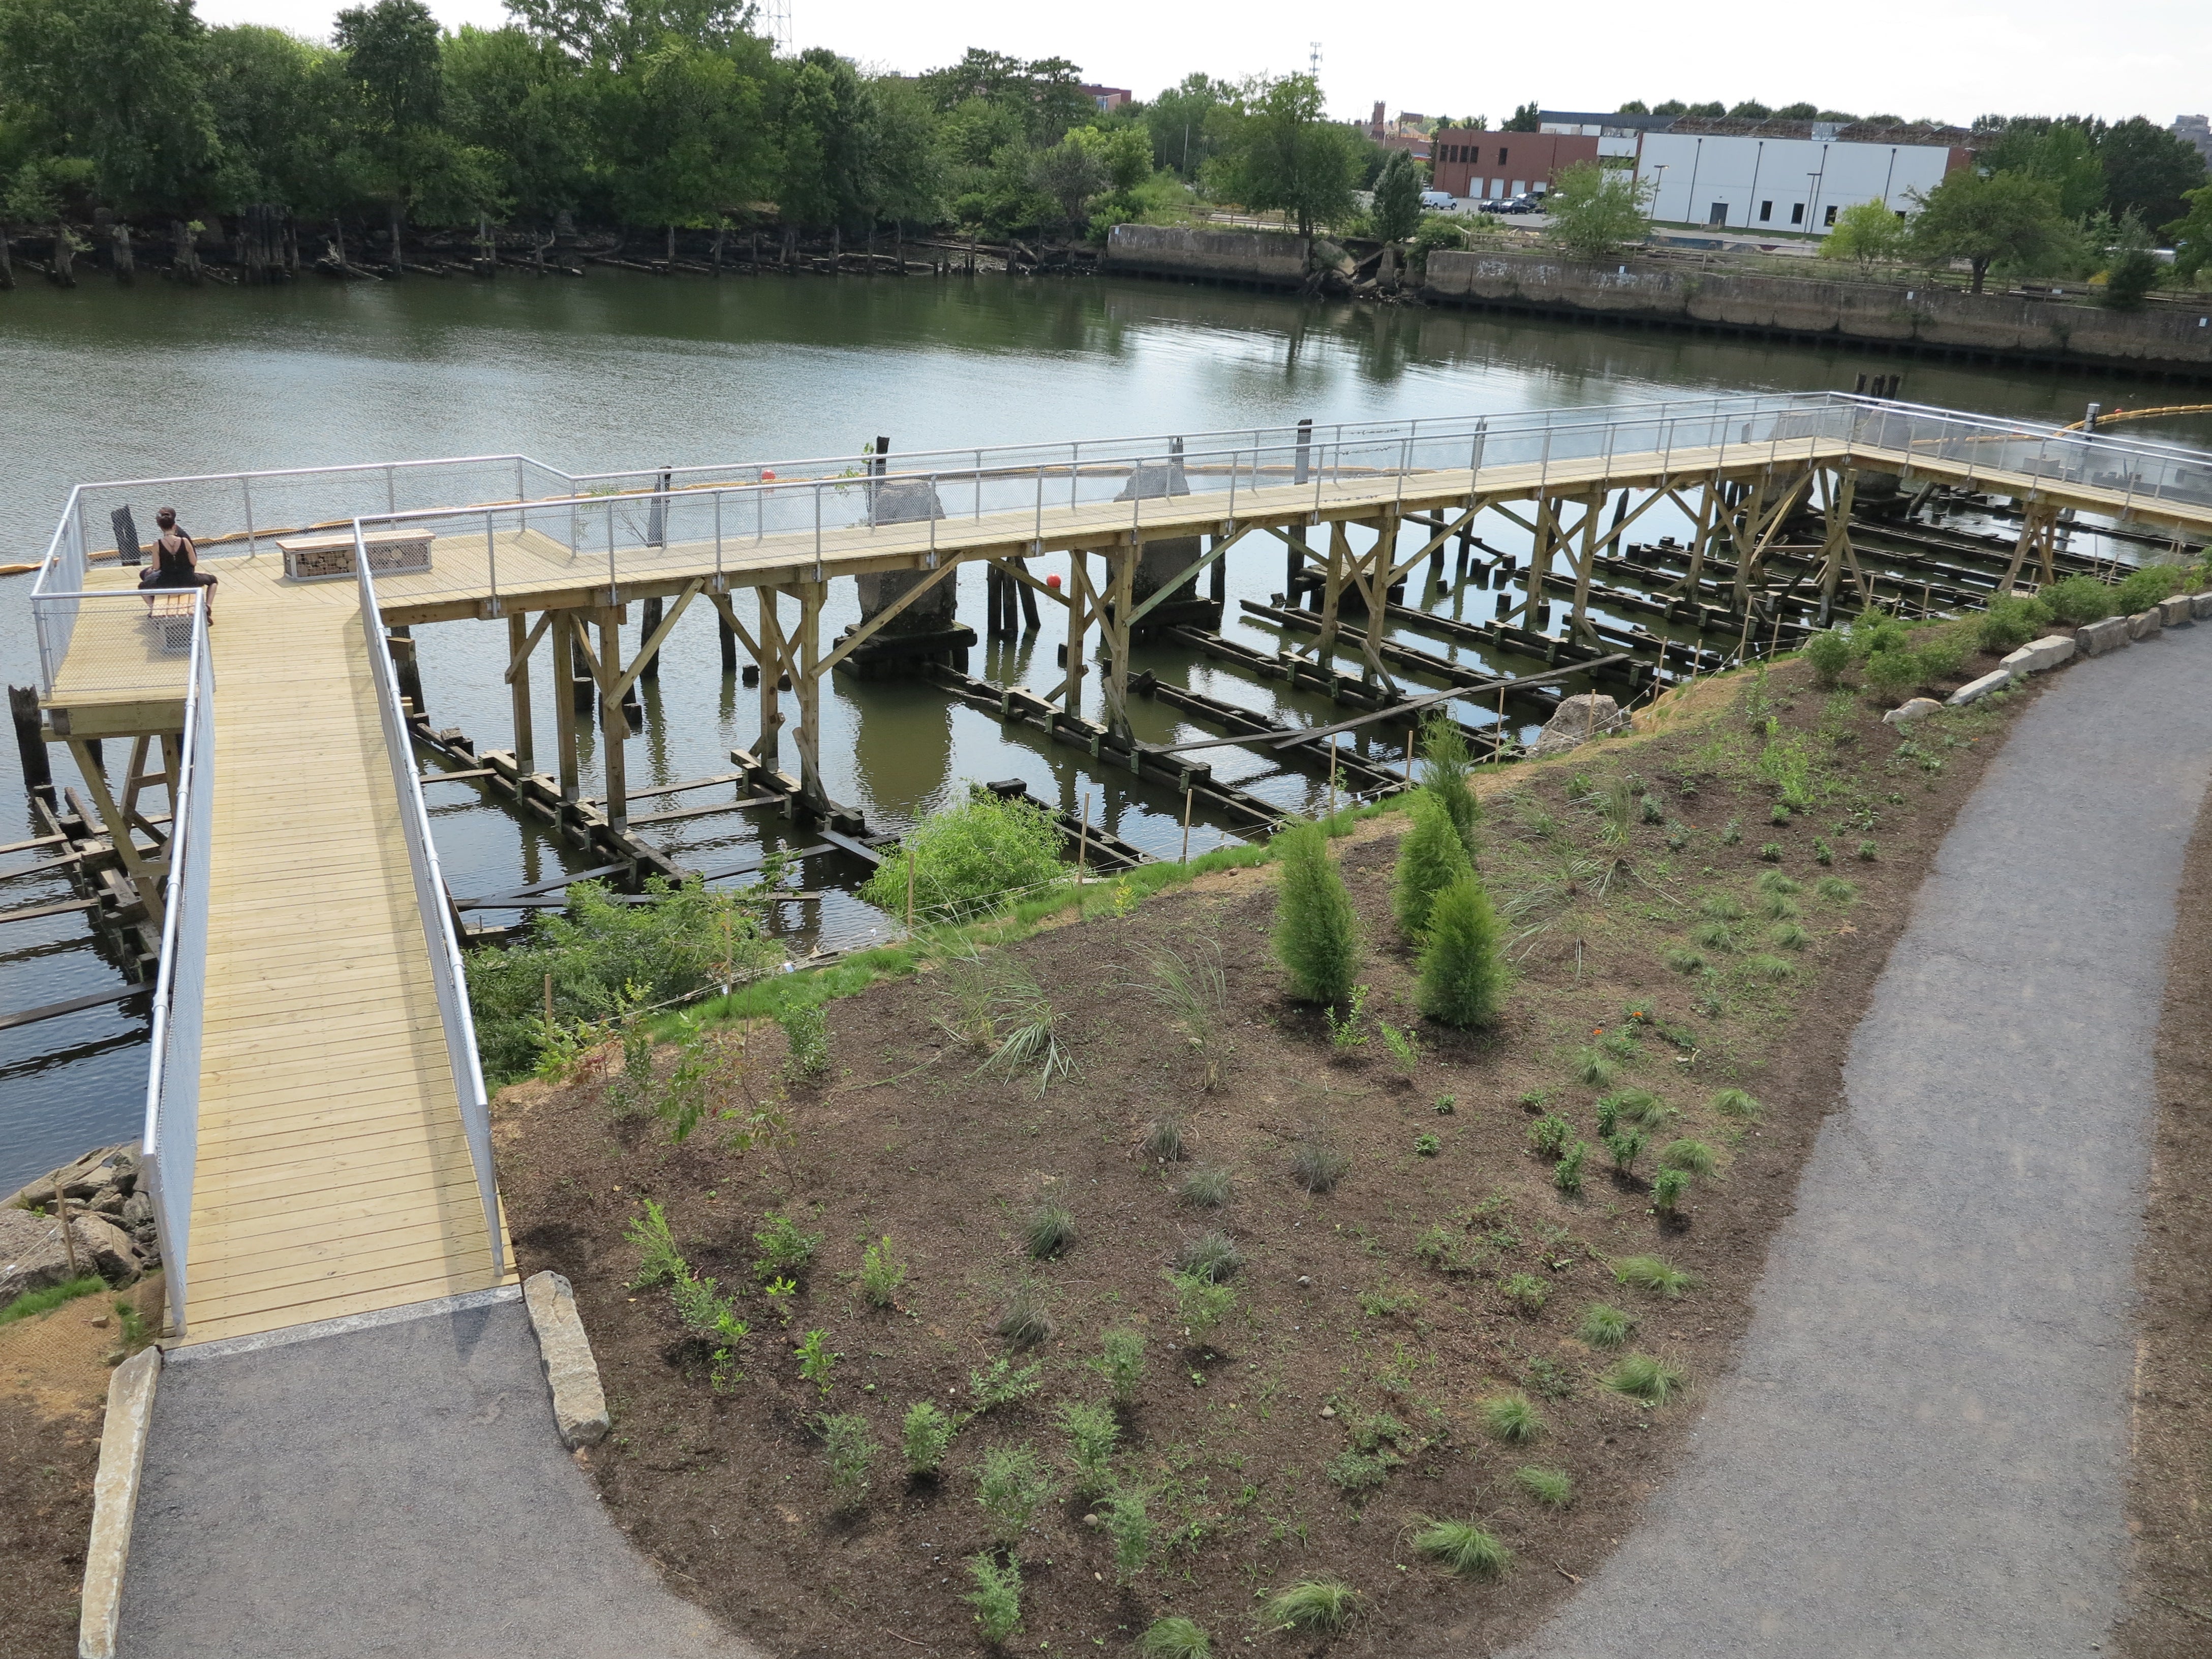 An elevated boardwalk extends the pier over the water